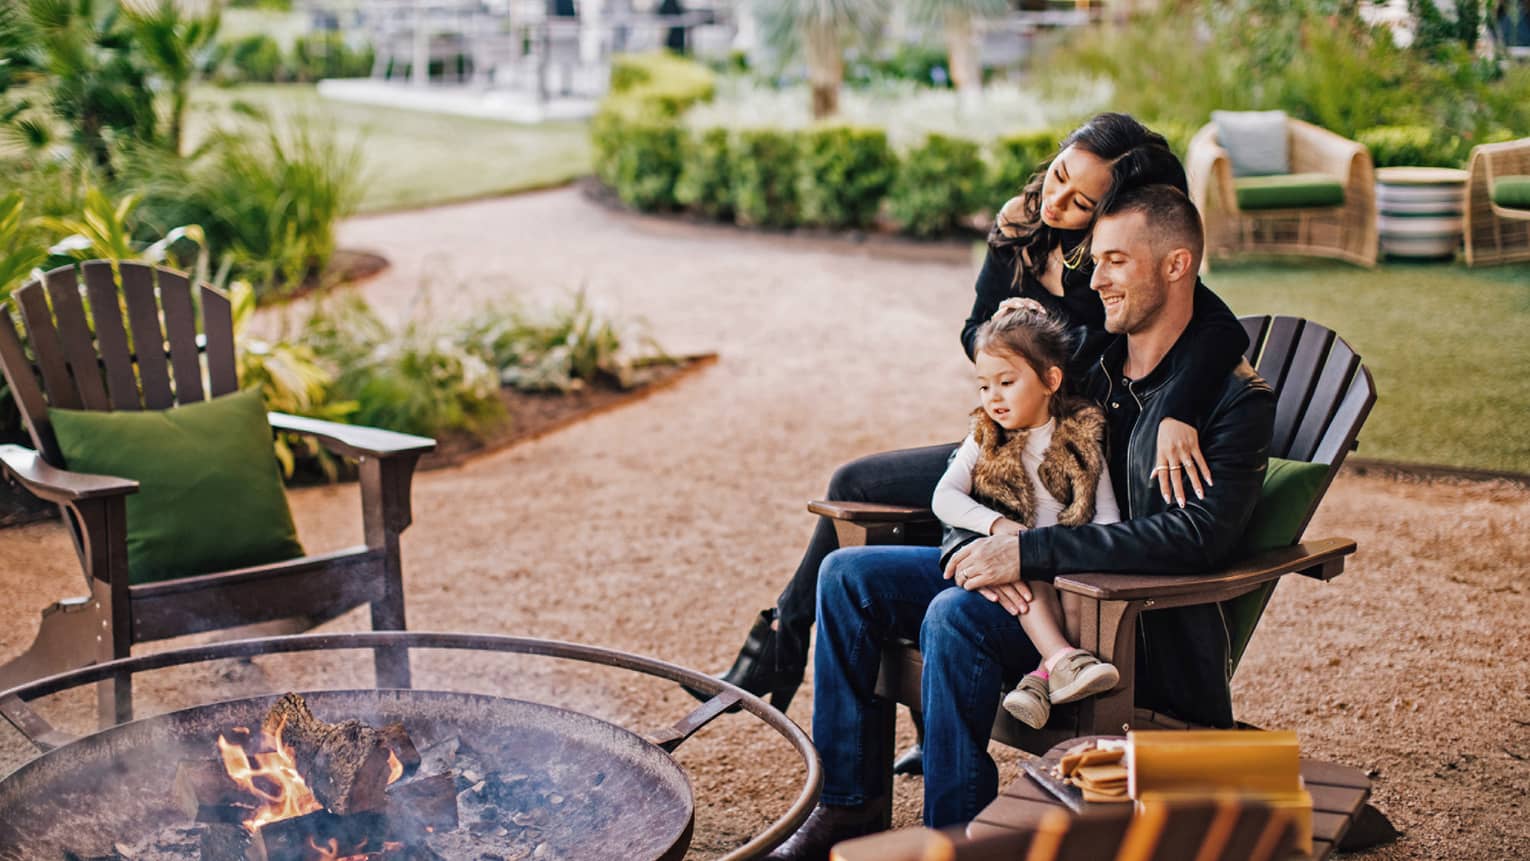 A family sitting on a wooden chair outside near a fire pit.